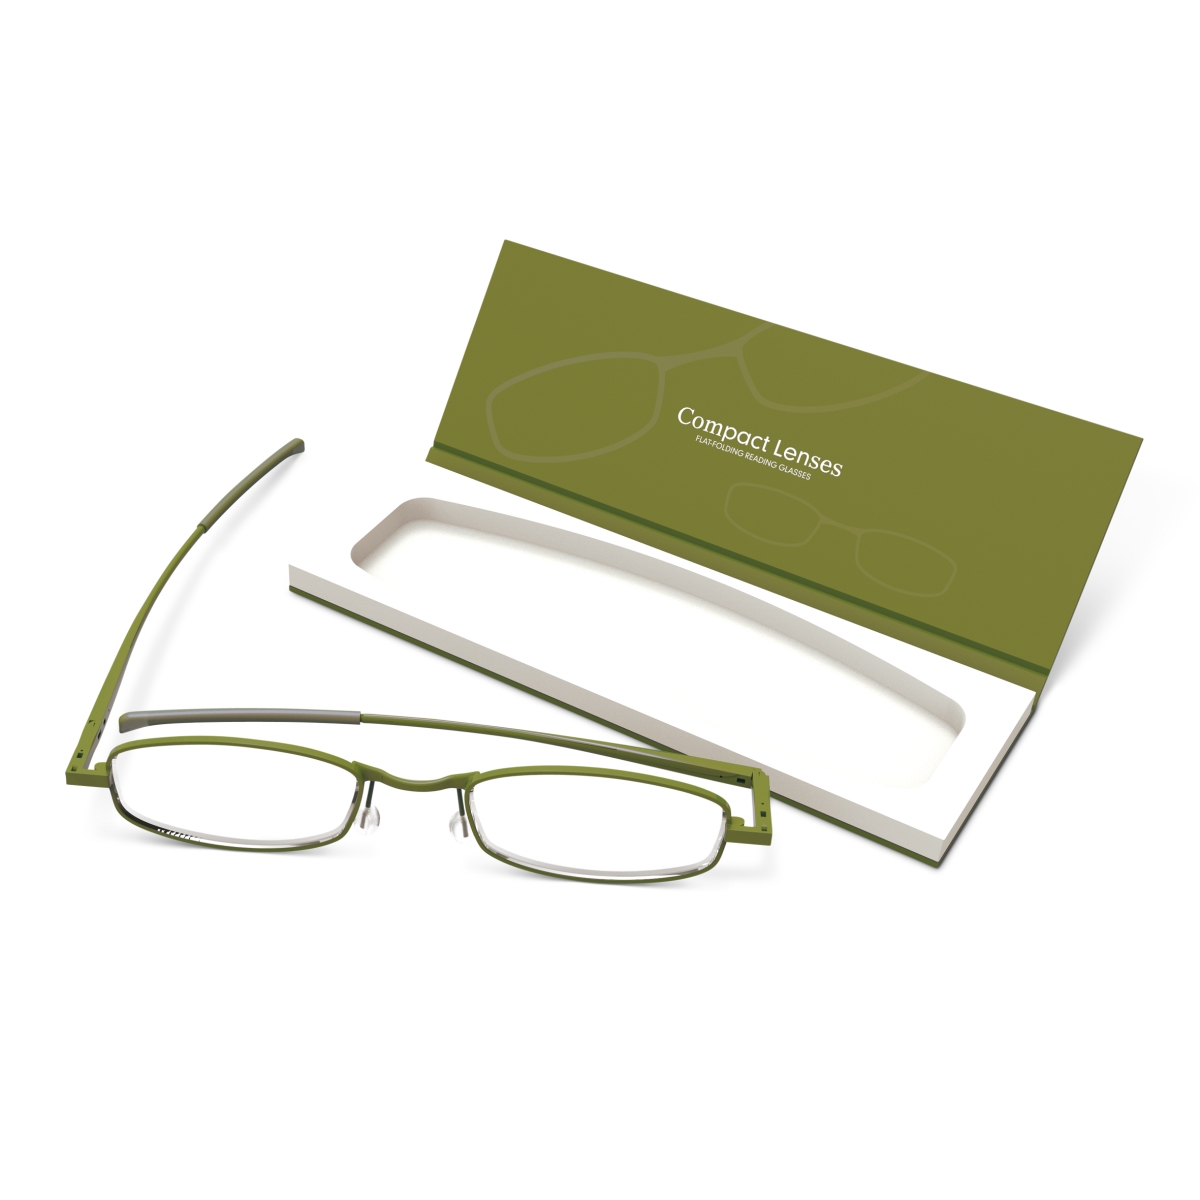 Picture of If USA 91728 Compact Lens Flat Folding Reading Glasses, Olive - Plus 2.0